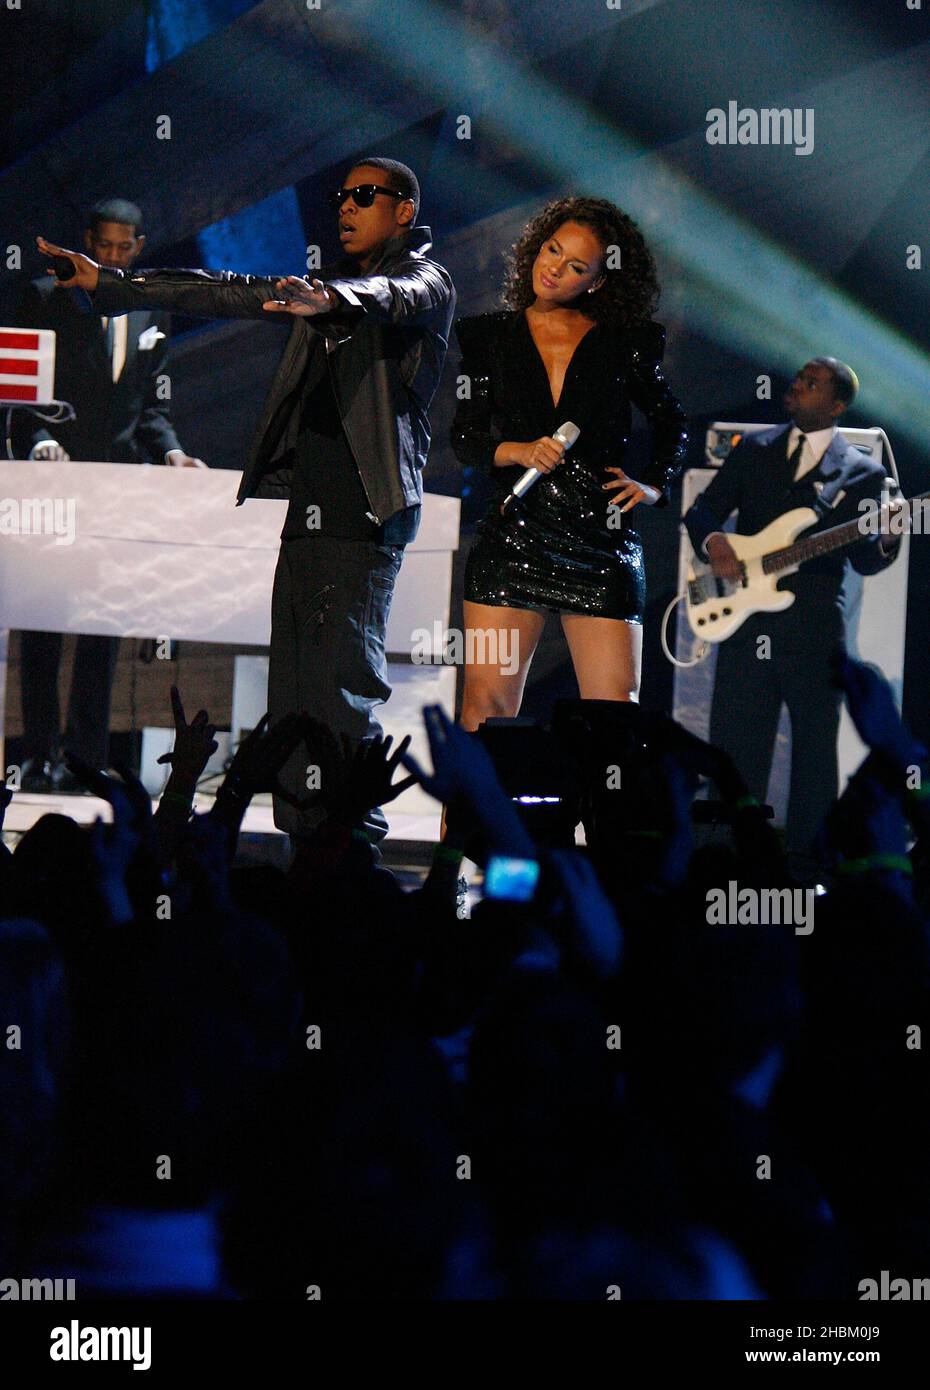 Jay Z and Alicia Keys performs on stage at the Brit Awards, February 16, 2010. Stock Photo